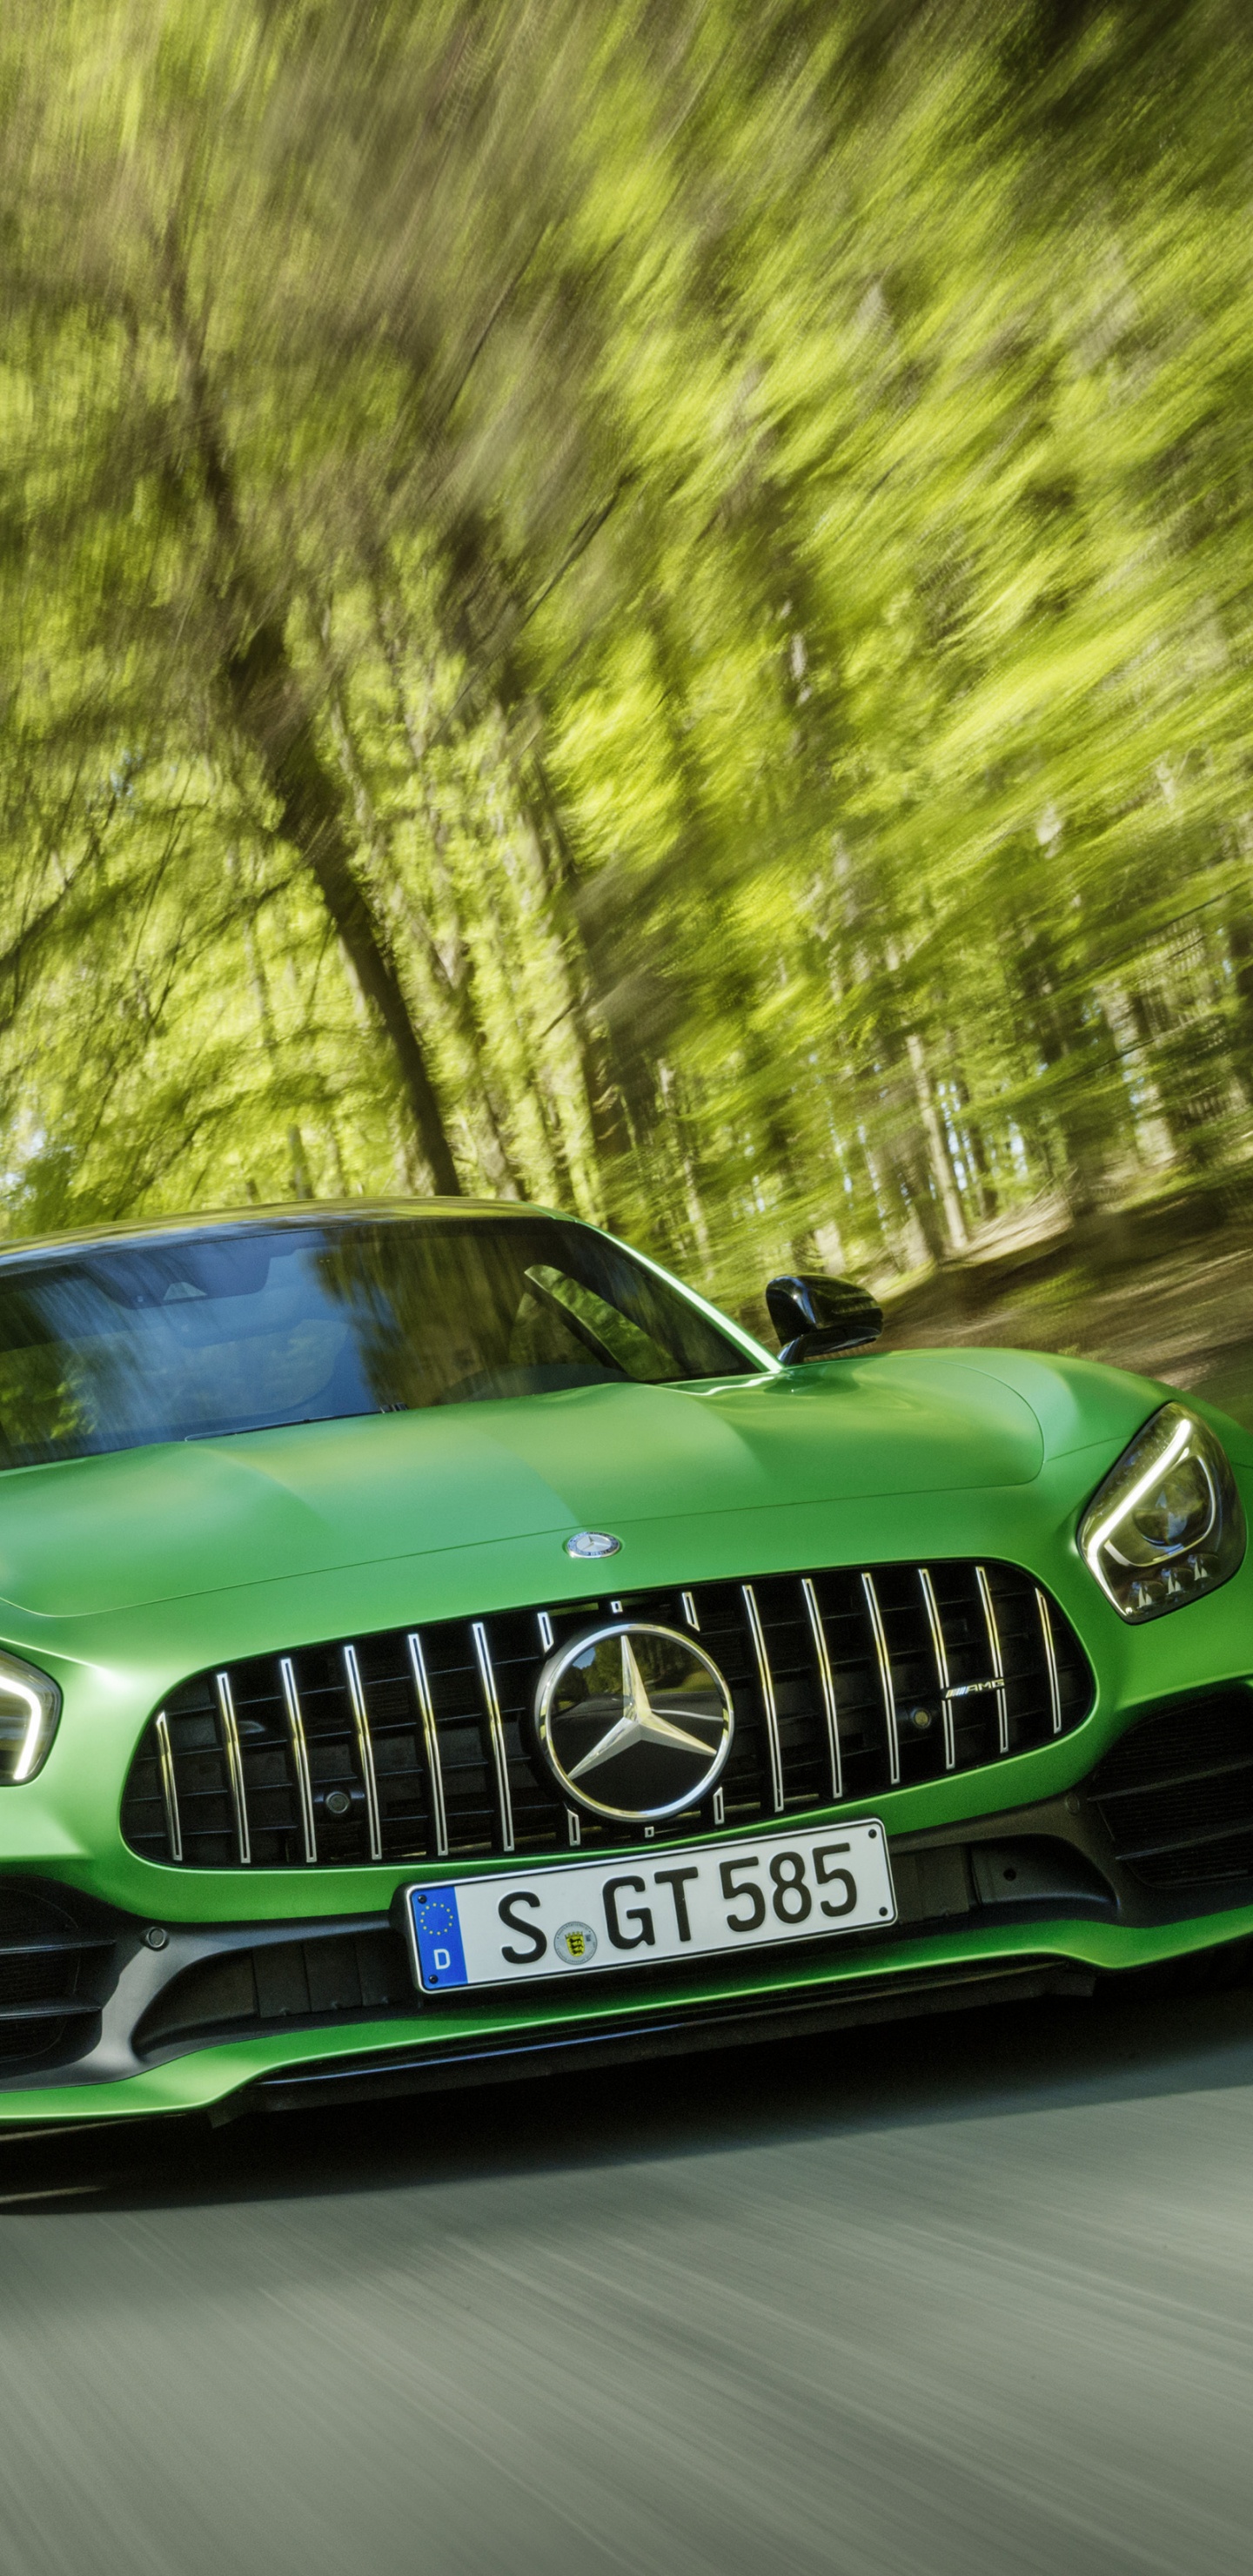 Green Mercedes Benz Car on Road During Daytime. Wallpaper in 1440x2960 Resolution